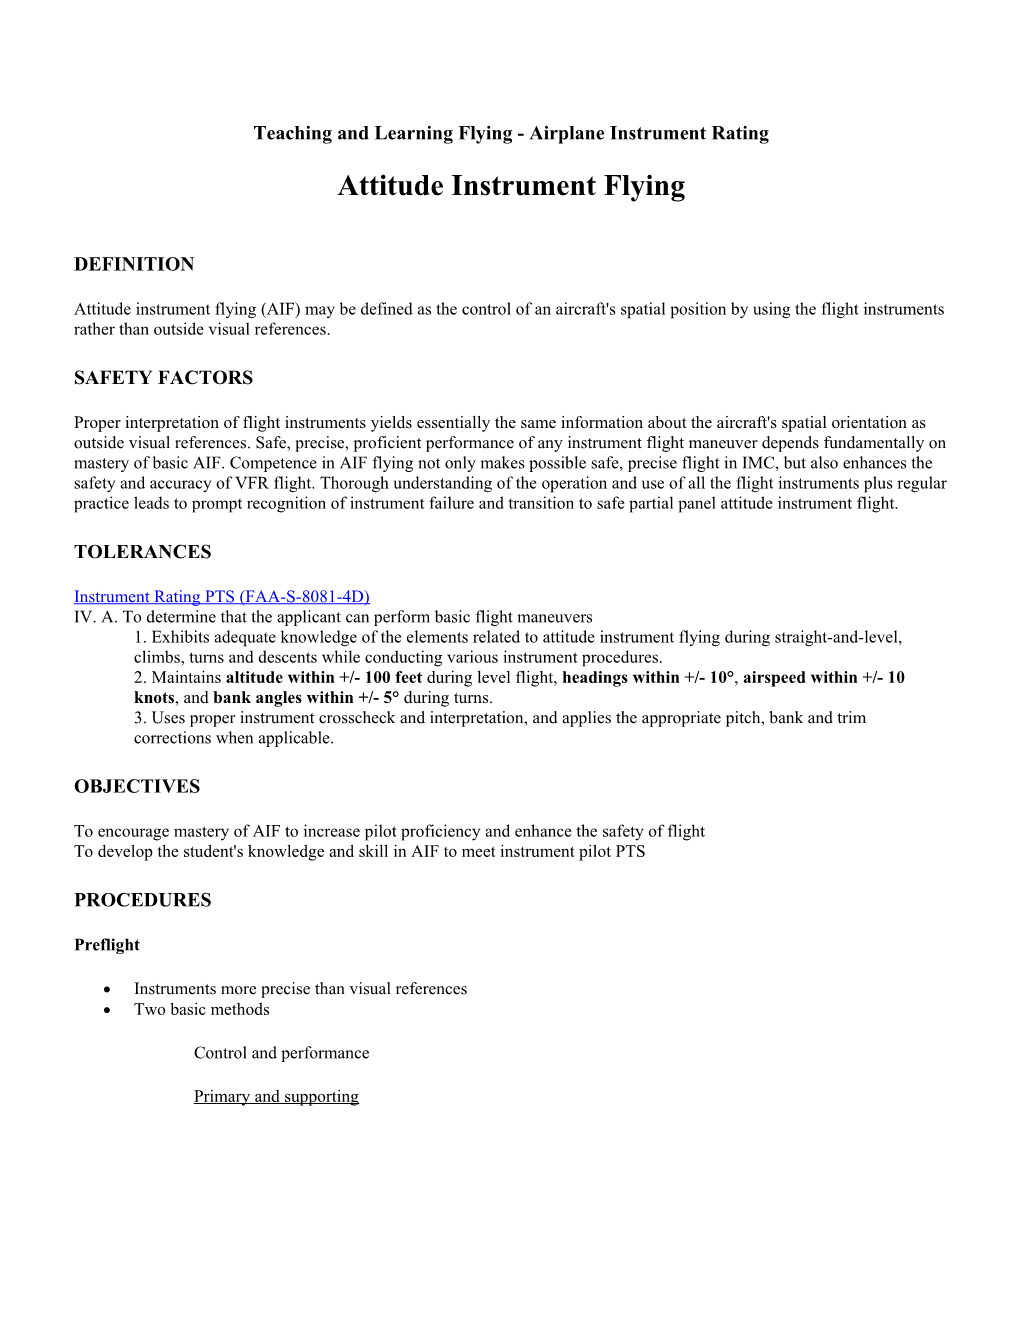 Teaching and Learning Flying - Airplane Instrument Rating